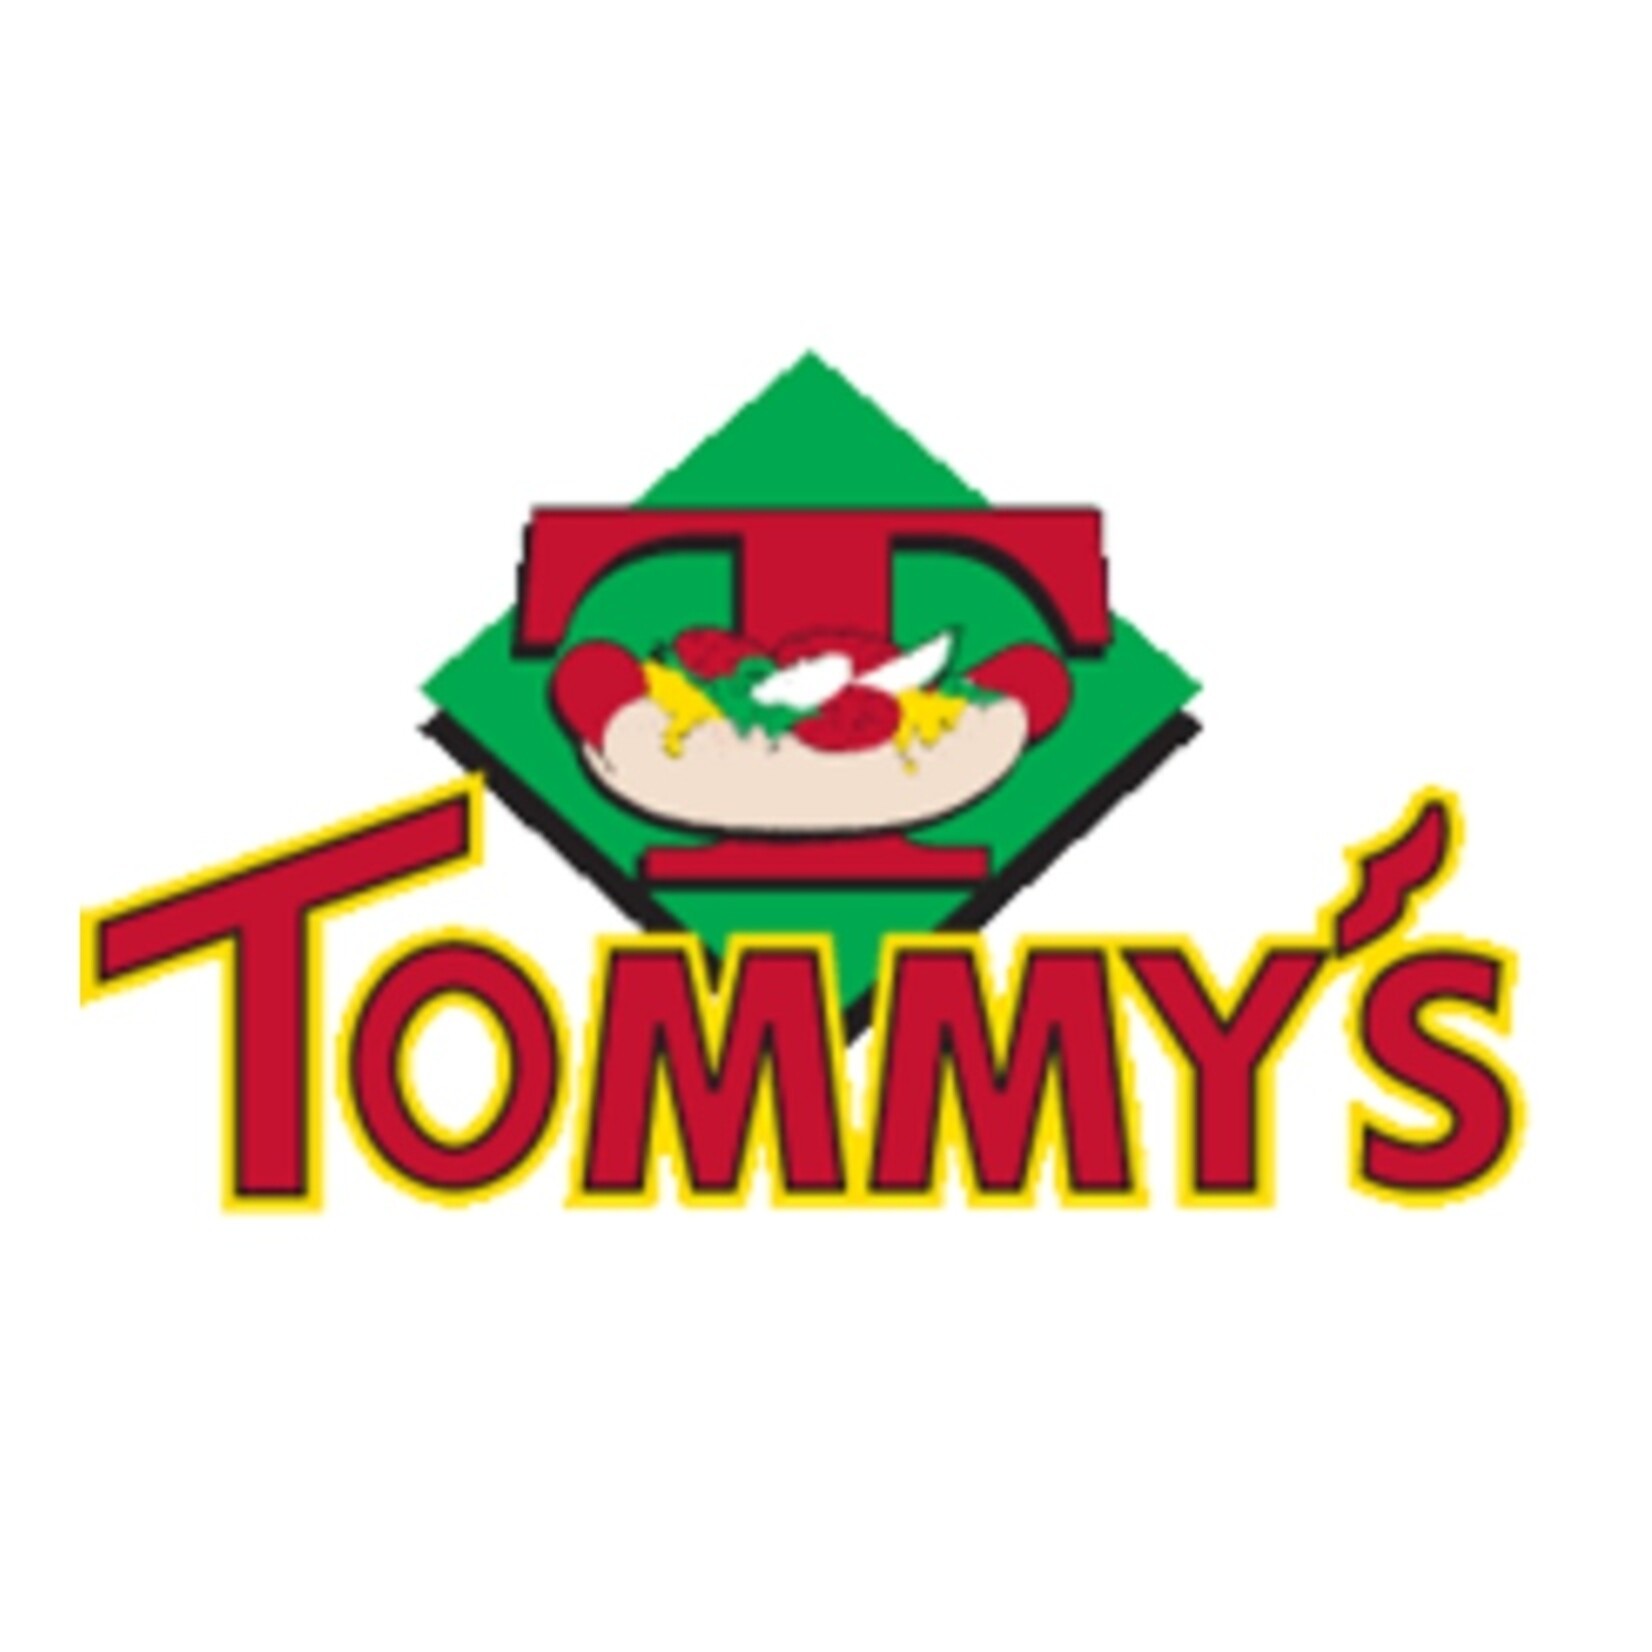 Tommy's Red Hots Tommy's Red Hots-Crystal Lake-Rt. 176 $10.00 Dining certificate